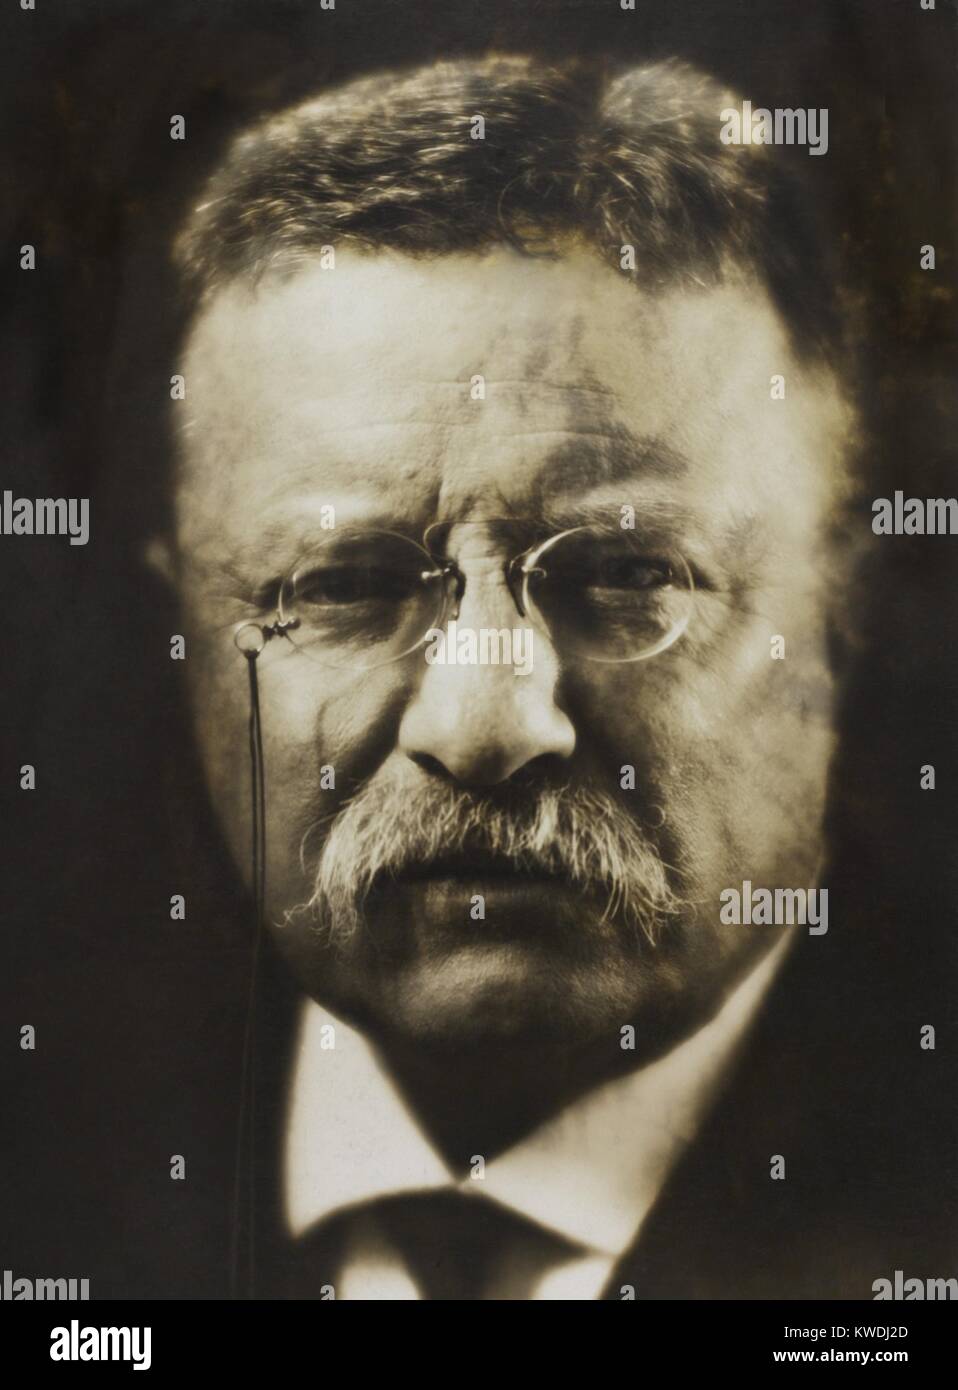 Col. Theodore Roosevelt, April 1917 by noted photographer, Pirie MacDonald. He photographed over 70,000 men during his career, including heads of state, religious leaders, and artists. Of these, he remembered Theodore Roosevelt as his most difficult subject (BSLOC 2017 8 71) Stock Photo